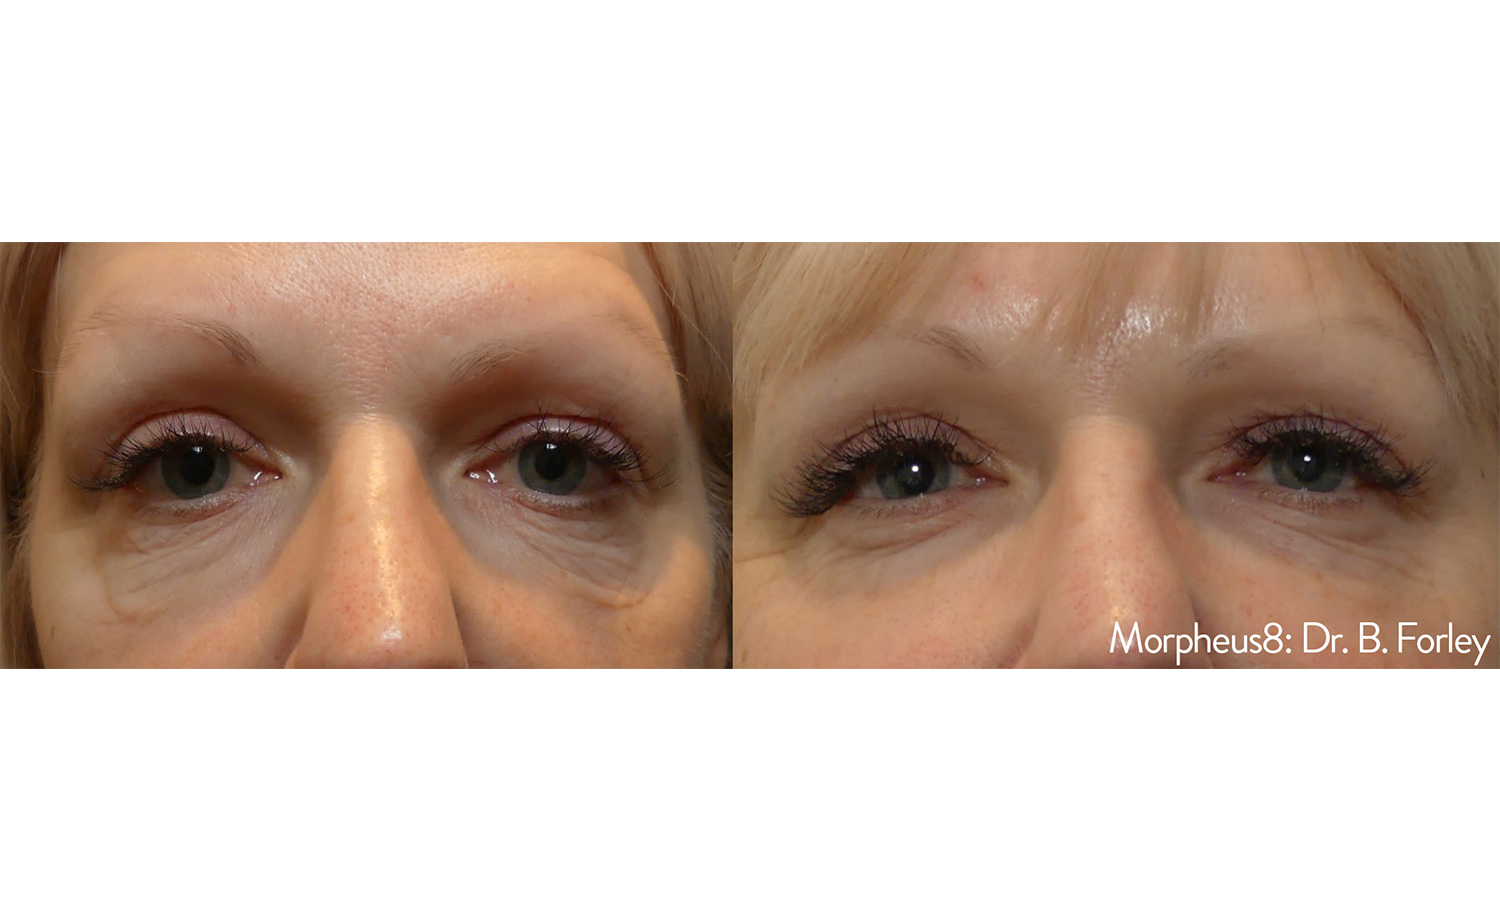 morpheus8-before-after-dr-b-forley-view